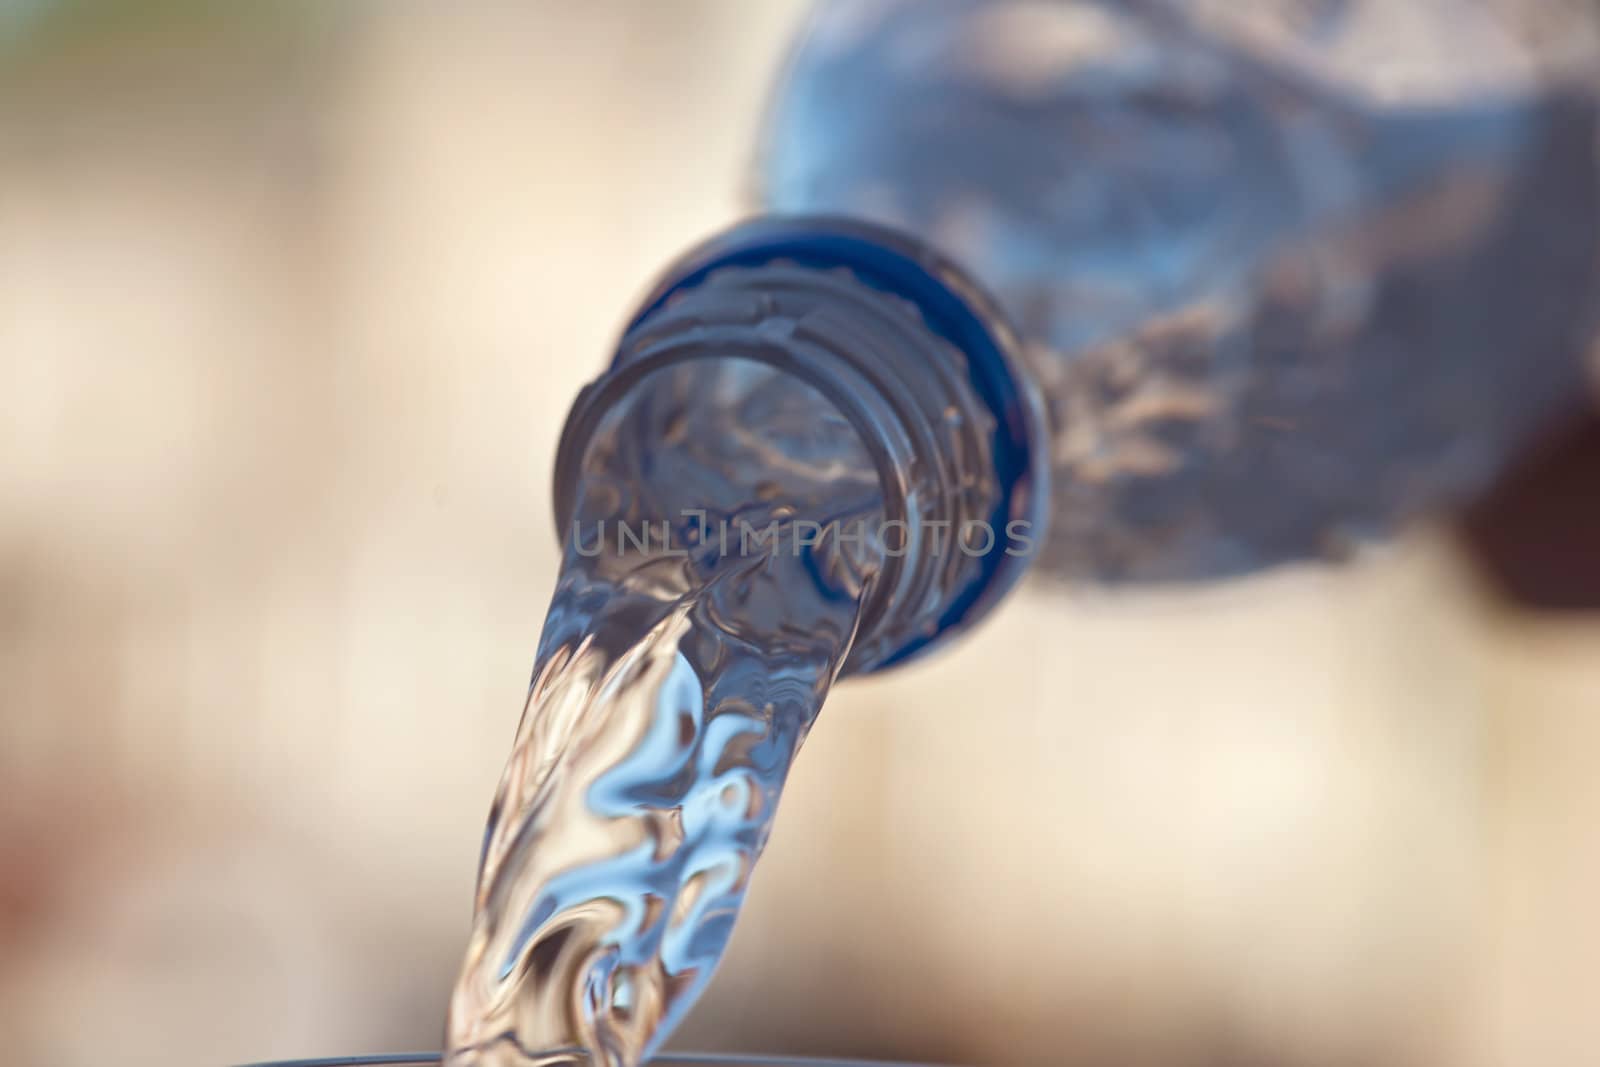 water is pouring down from plastic bottle, image on white background